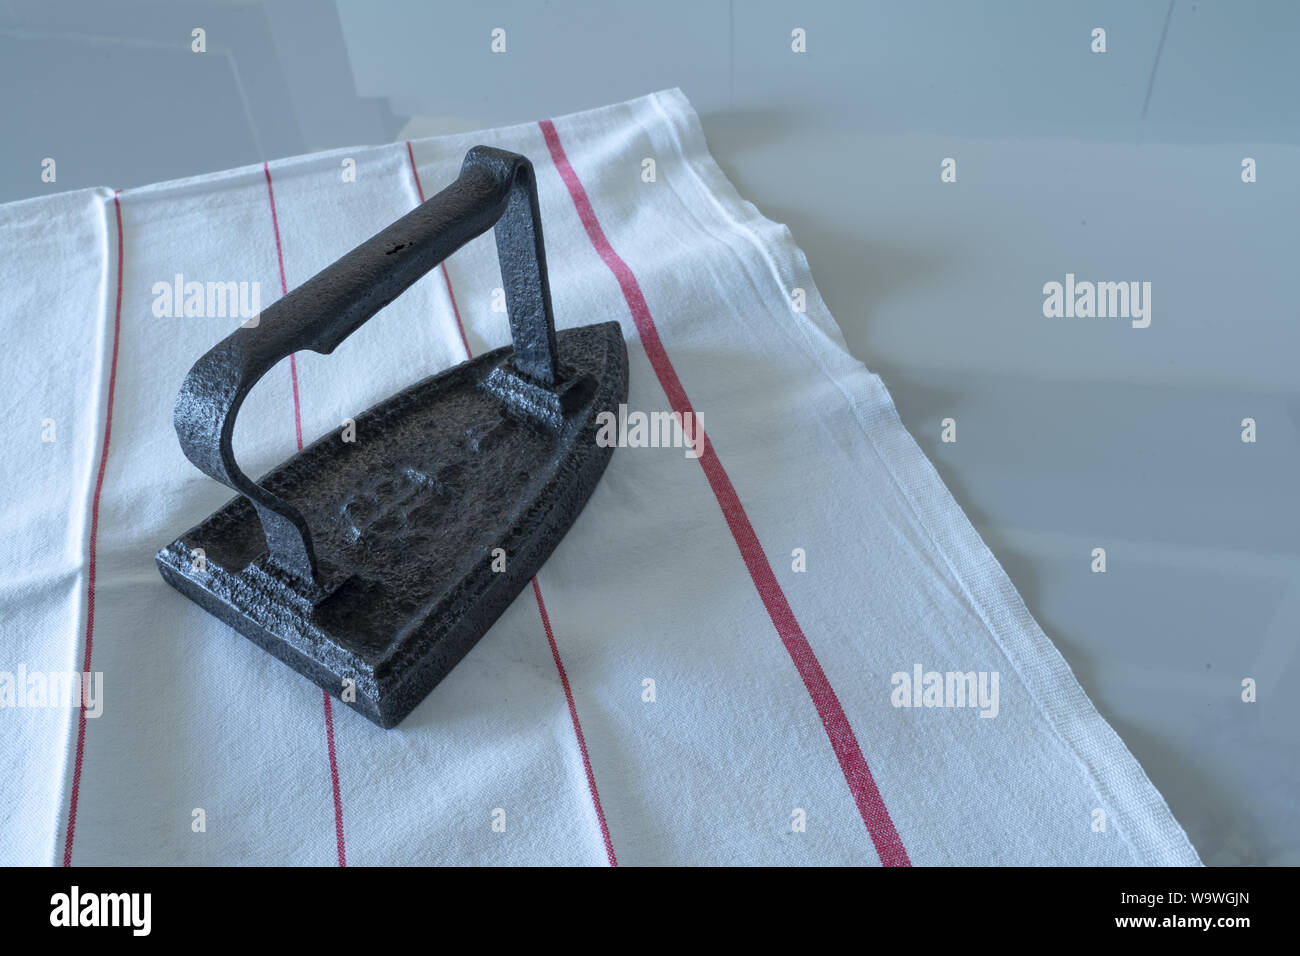 an vintage smoothing ironer object on a table Stock Photo